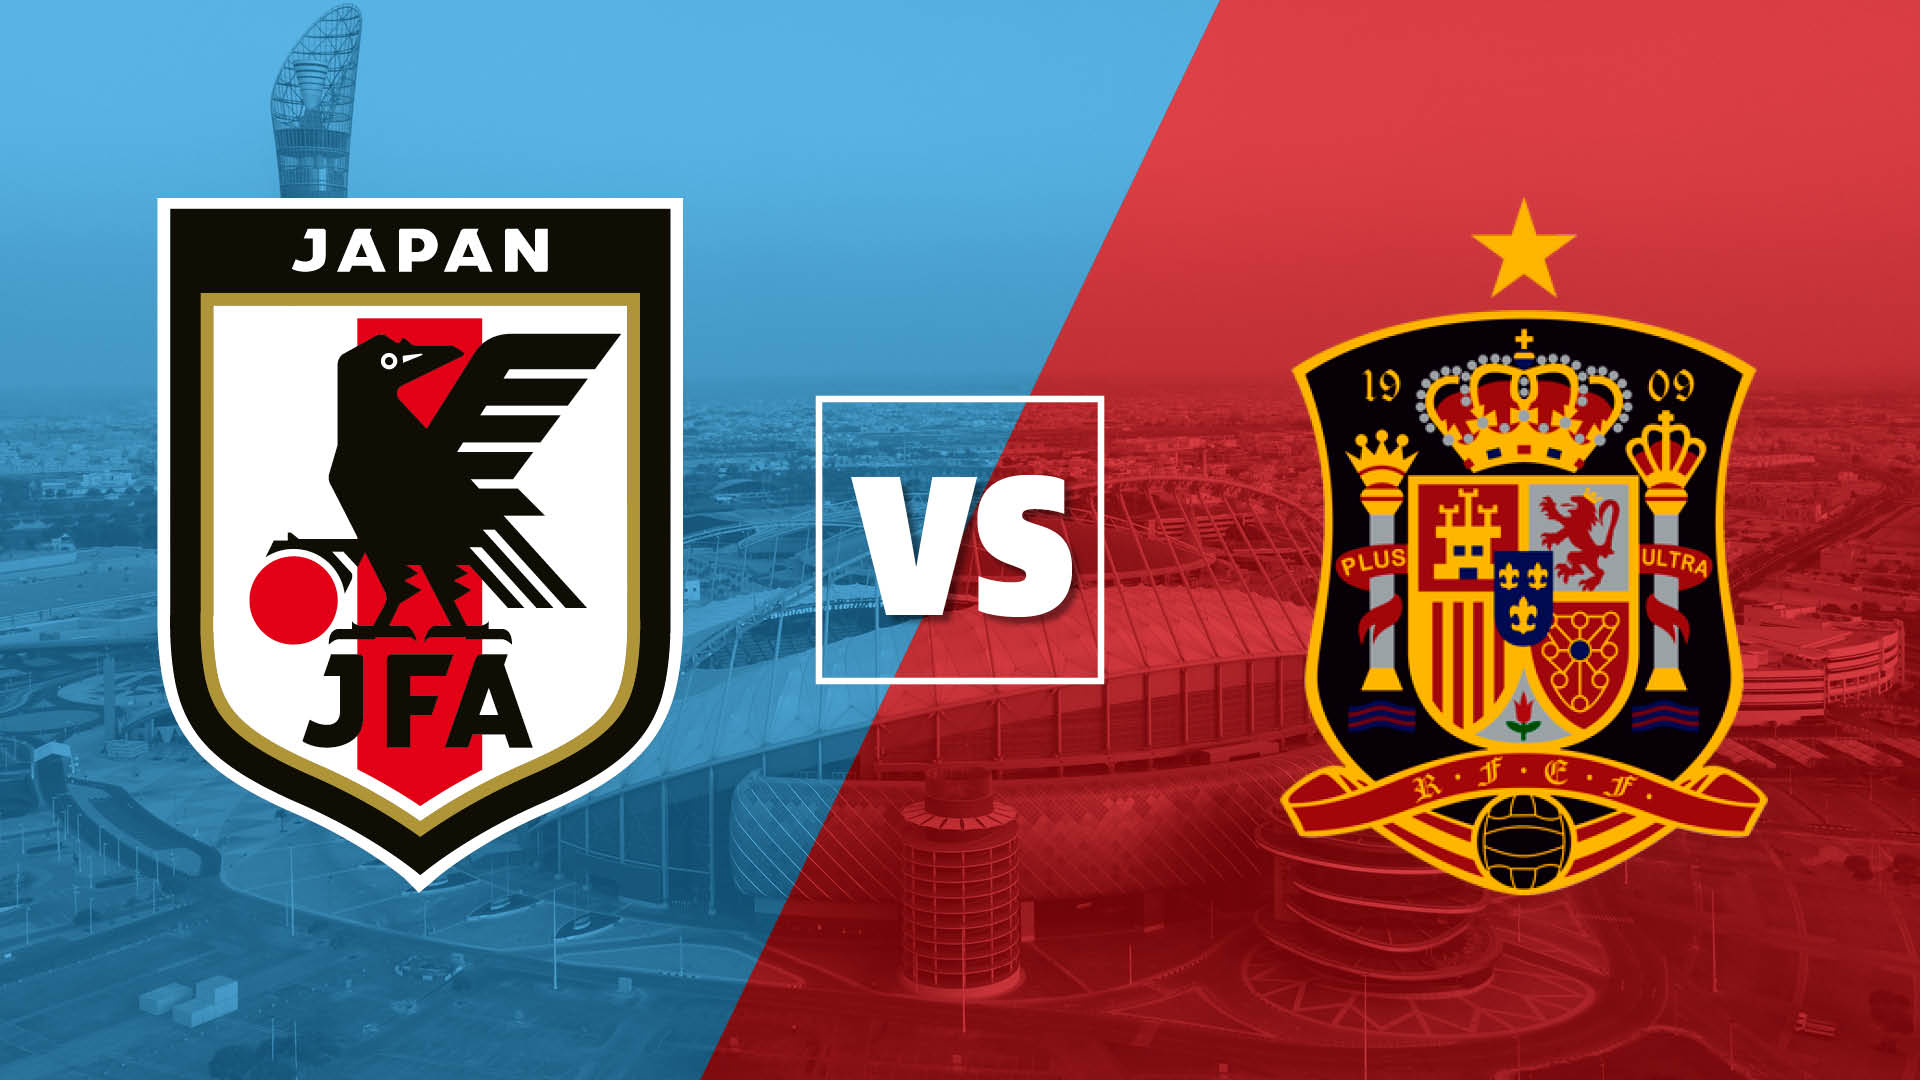 Japan vs Spain live stream and how to watch the 2022 FIFA World Cup online